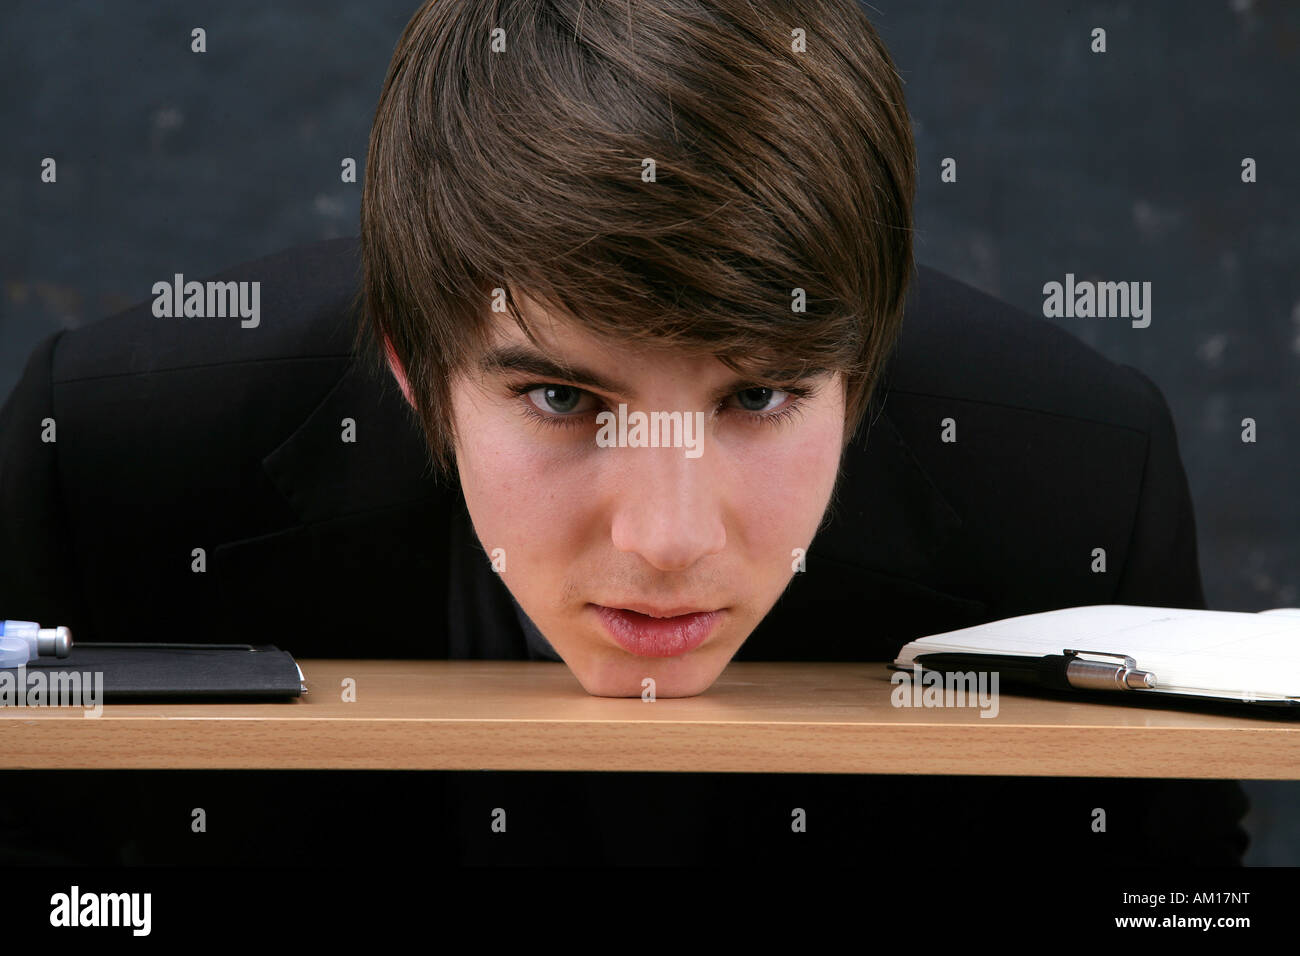 Young man resting the head on a desk Stock Photo